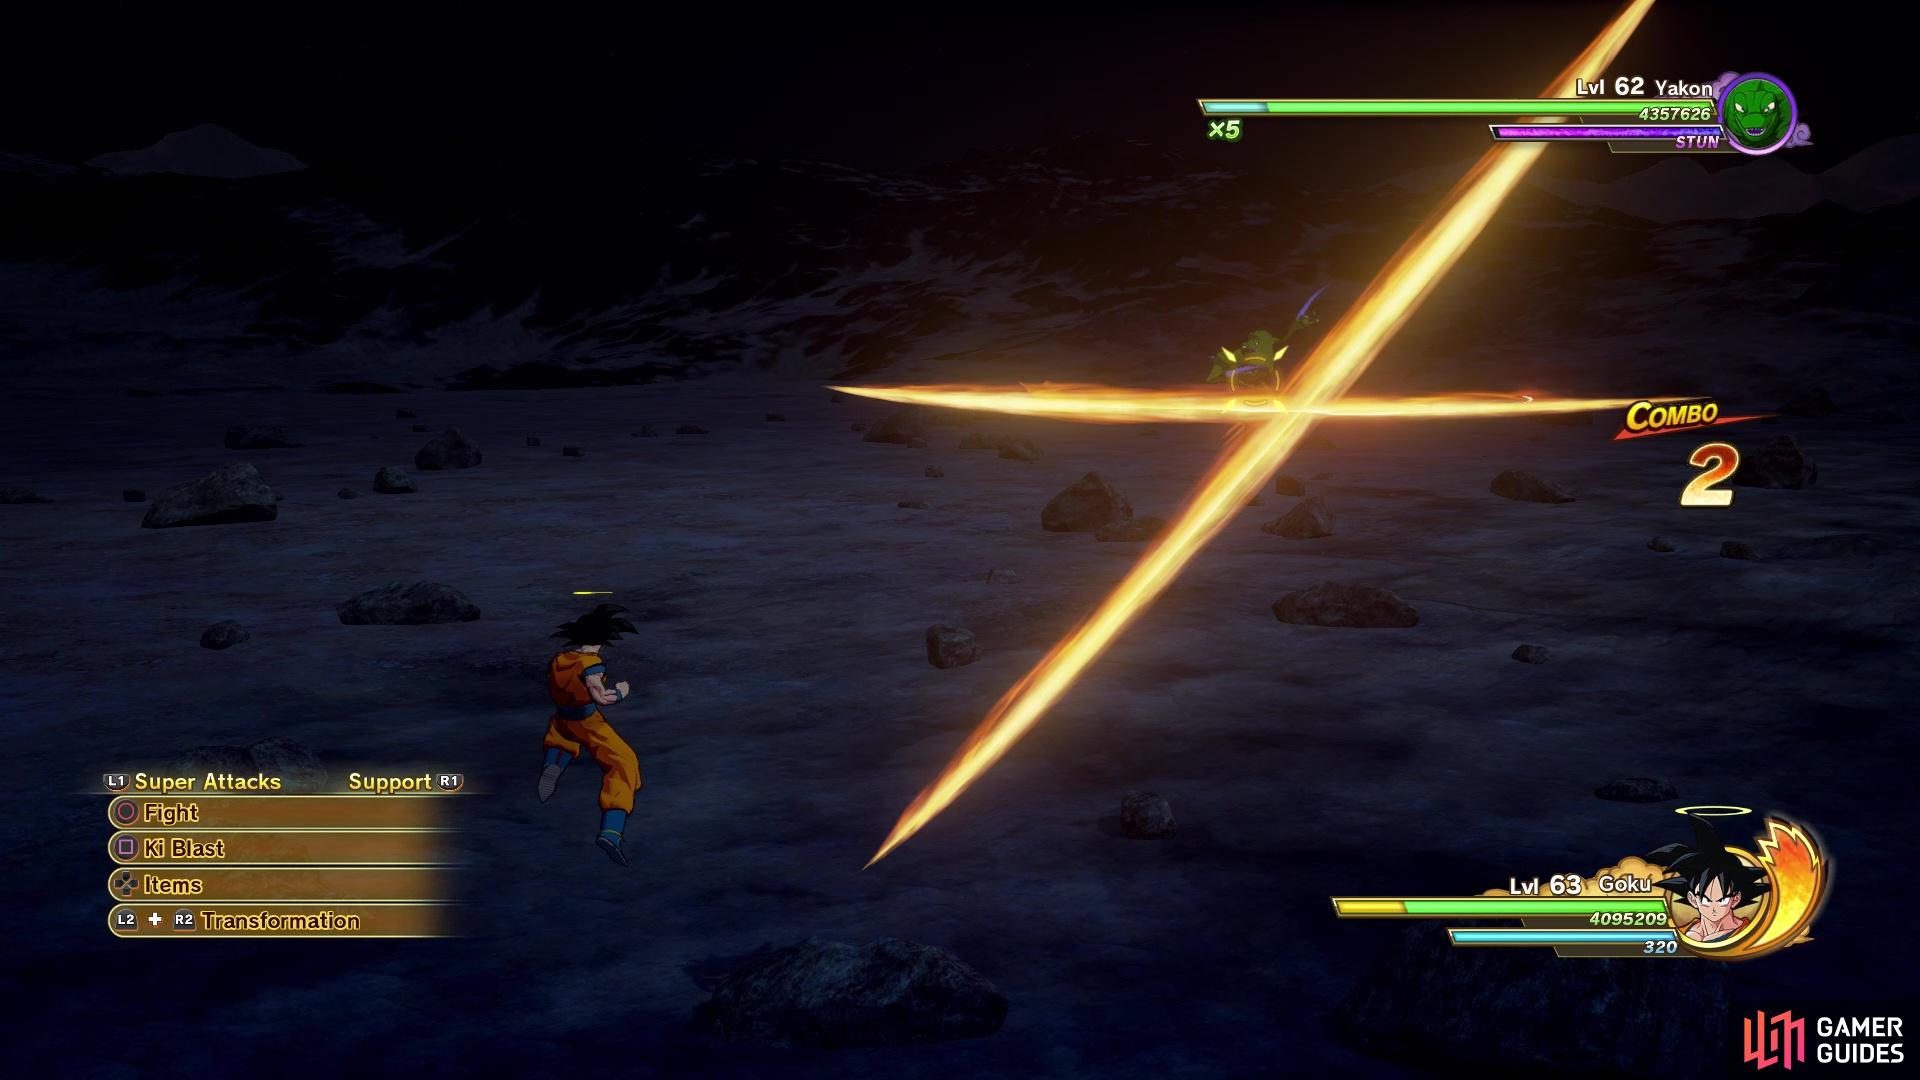 Cross Claw will be a bunch of cross-shaped projectiles shot at you